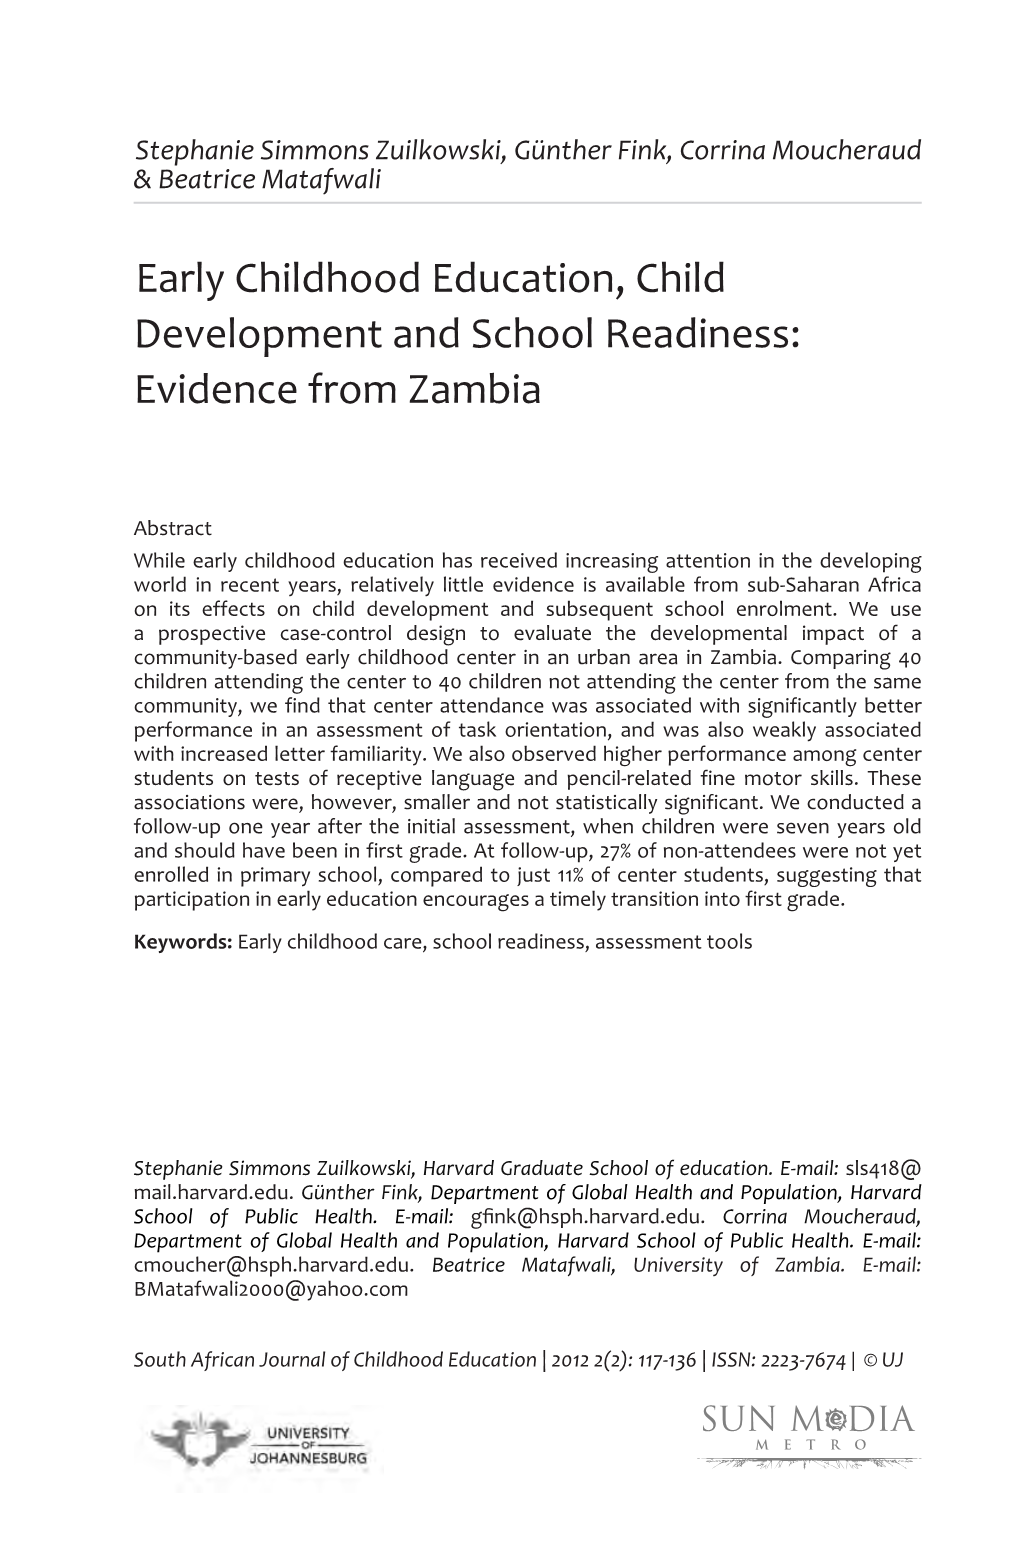 Early Childhood Education, Child Development and School Readiness: Evidence from Zambia